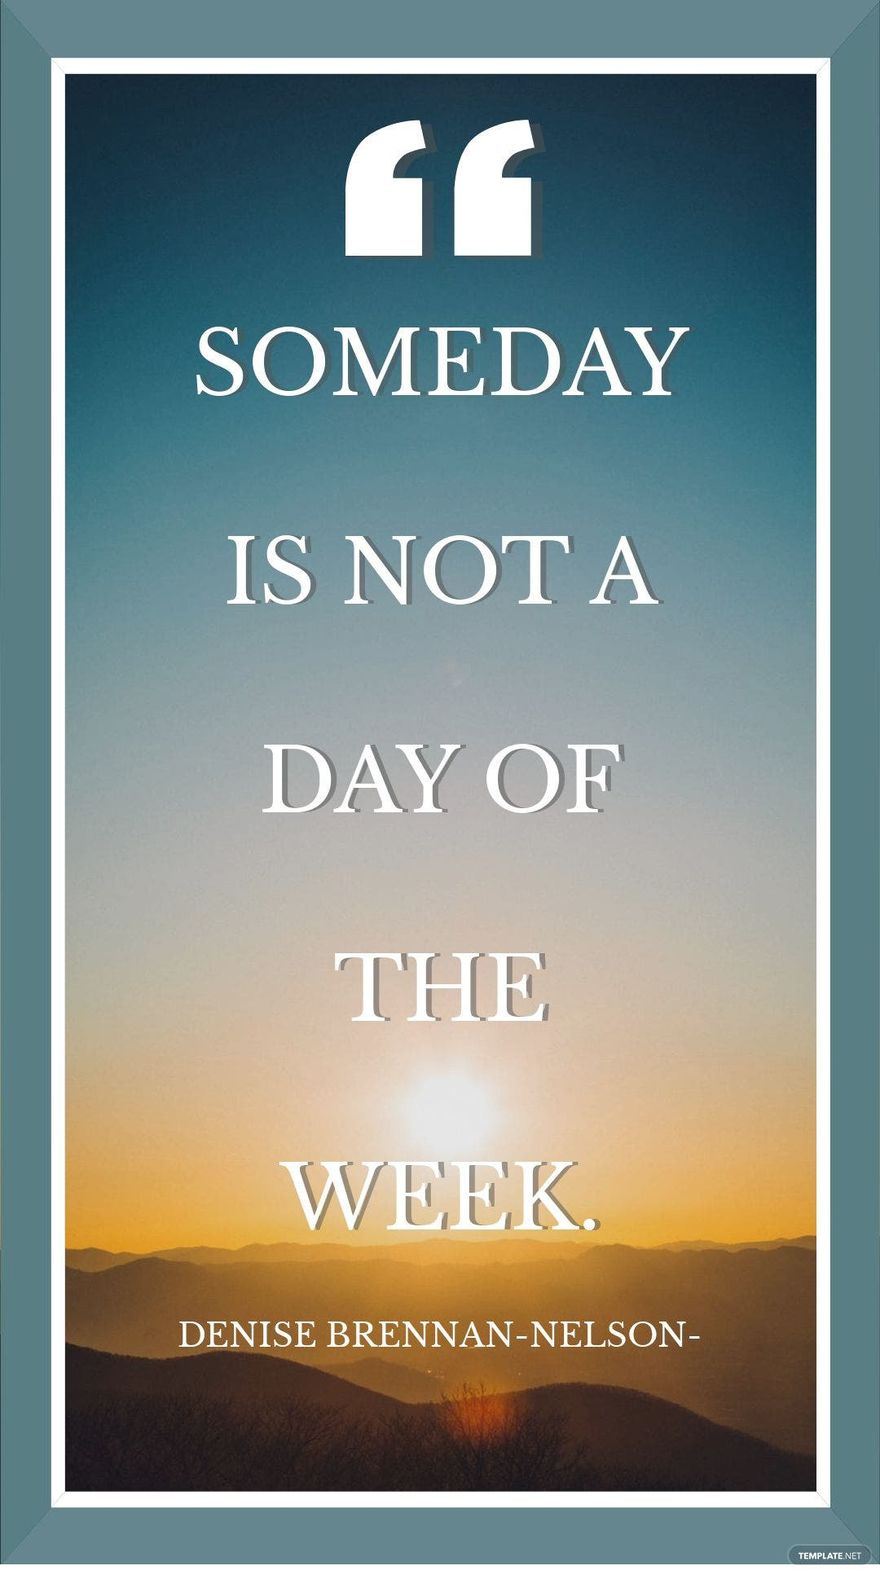 Denise Brennan-Nelson - Someday is not a day of the week.